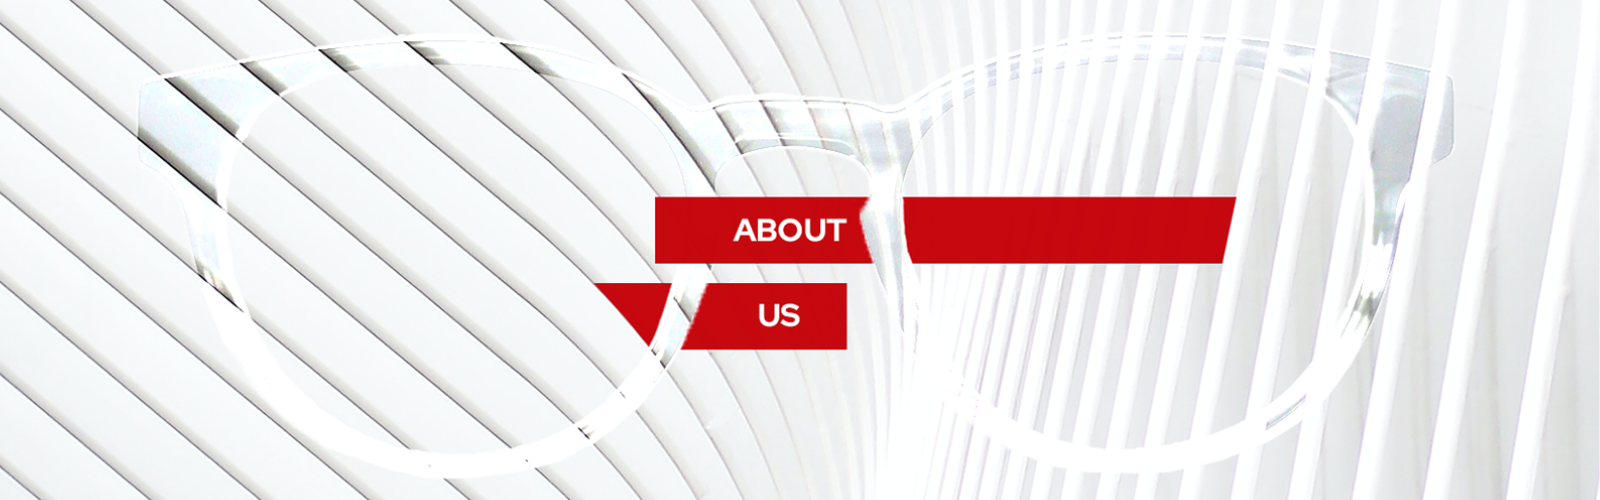 Red and white "About Us" script threaded through transparent eyeglasses